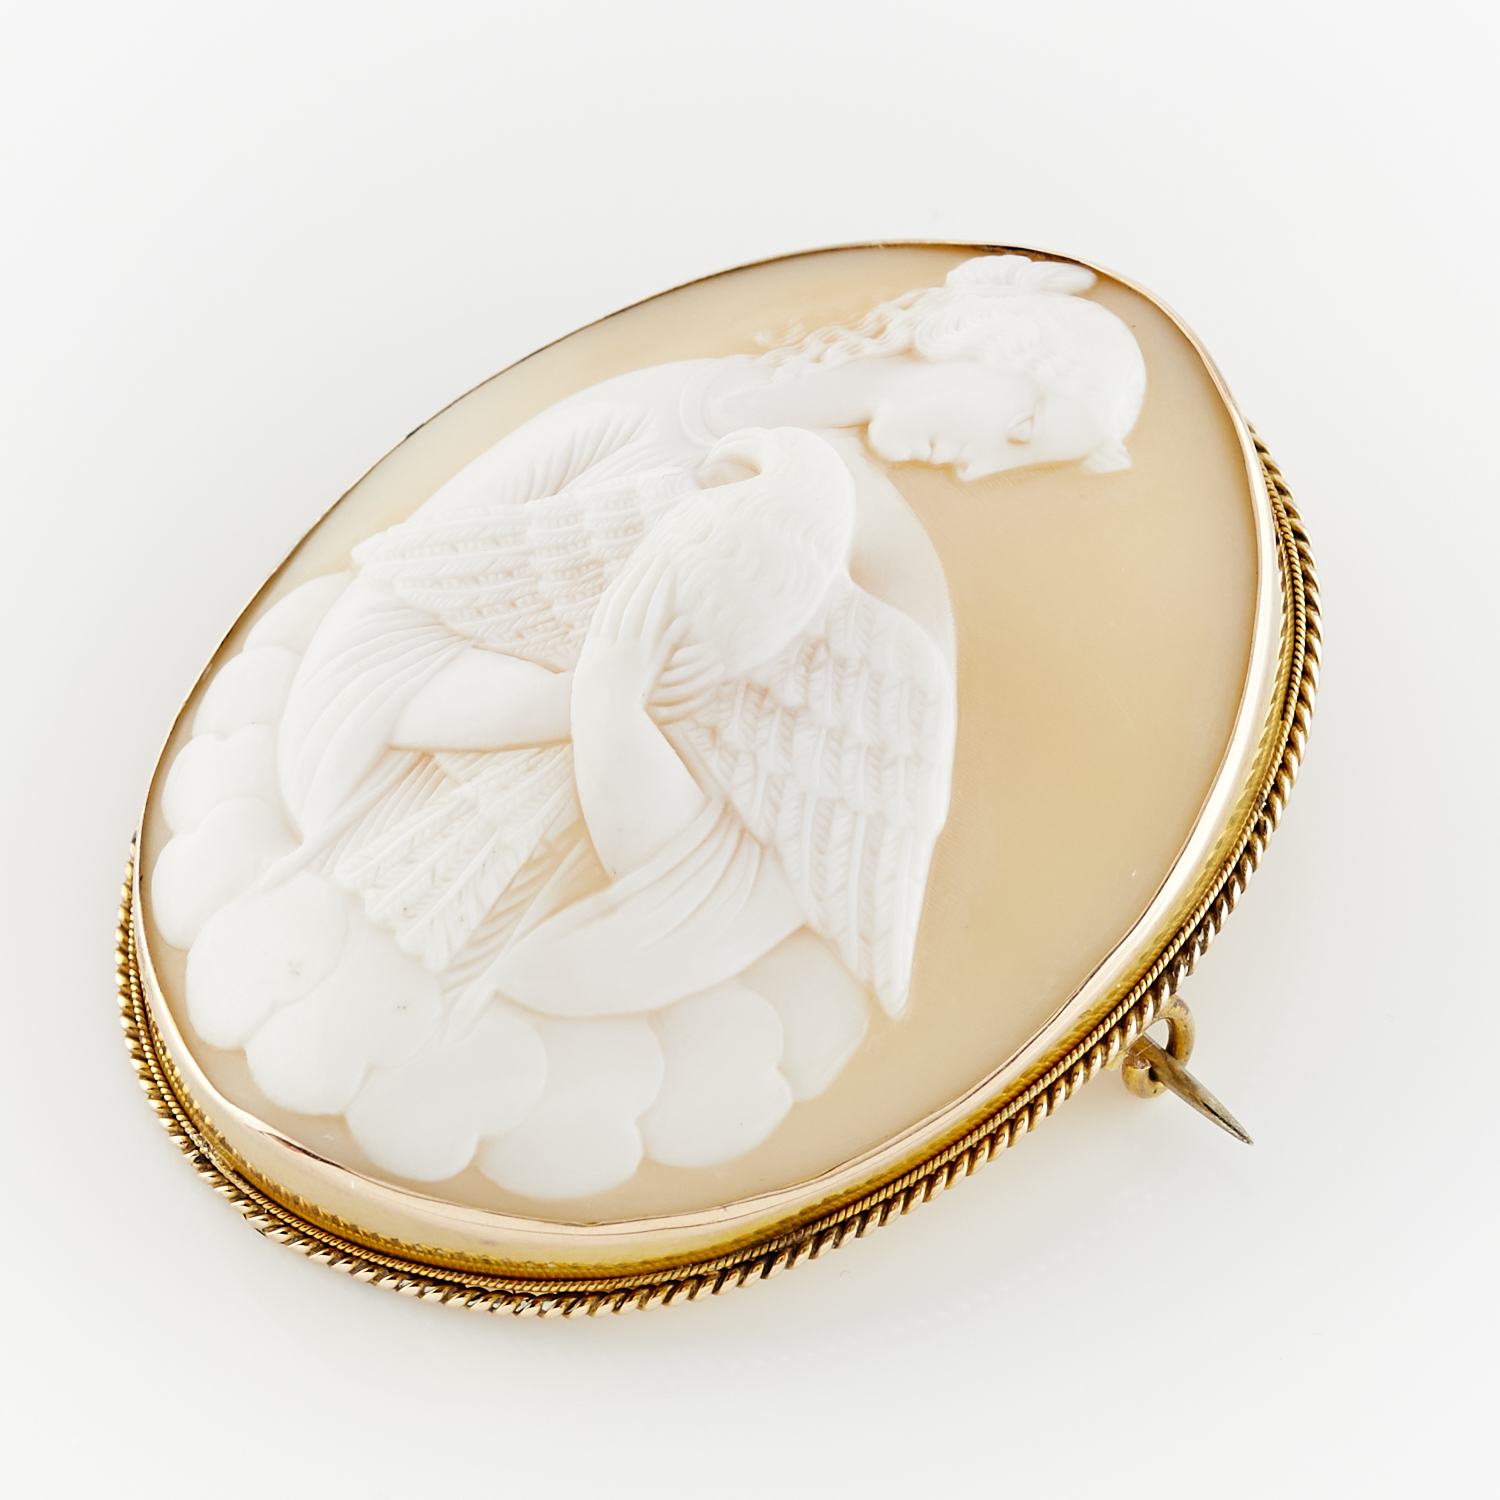 English 9ct Gold Cameo Brooch Depicting Hebe - Image 6 of 7